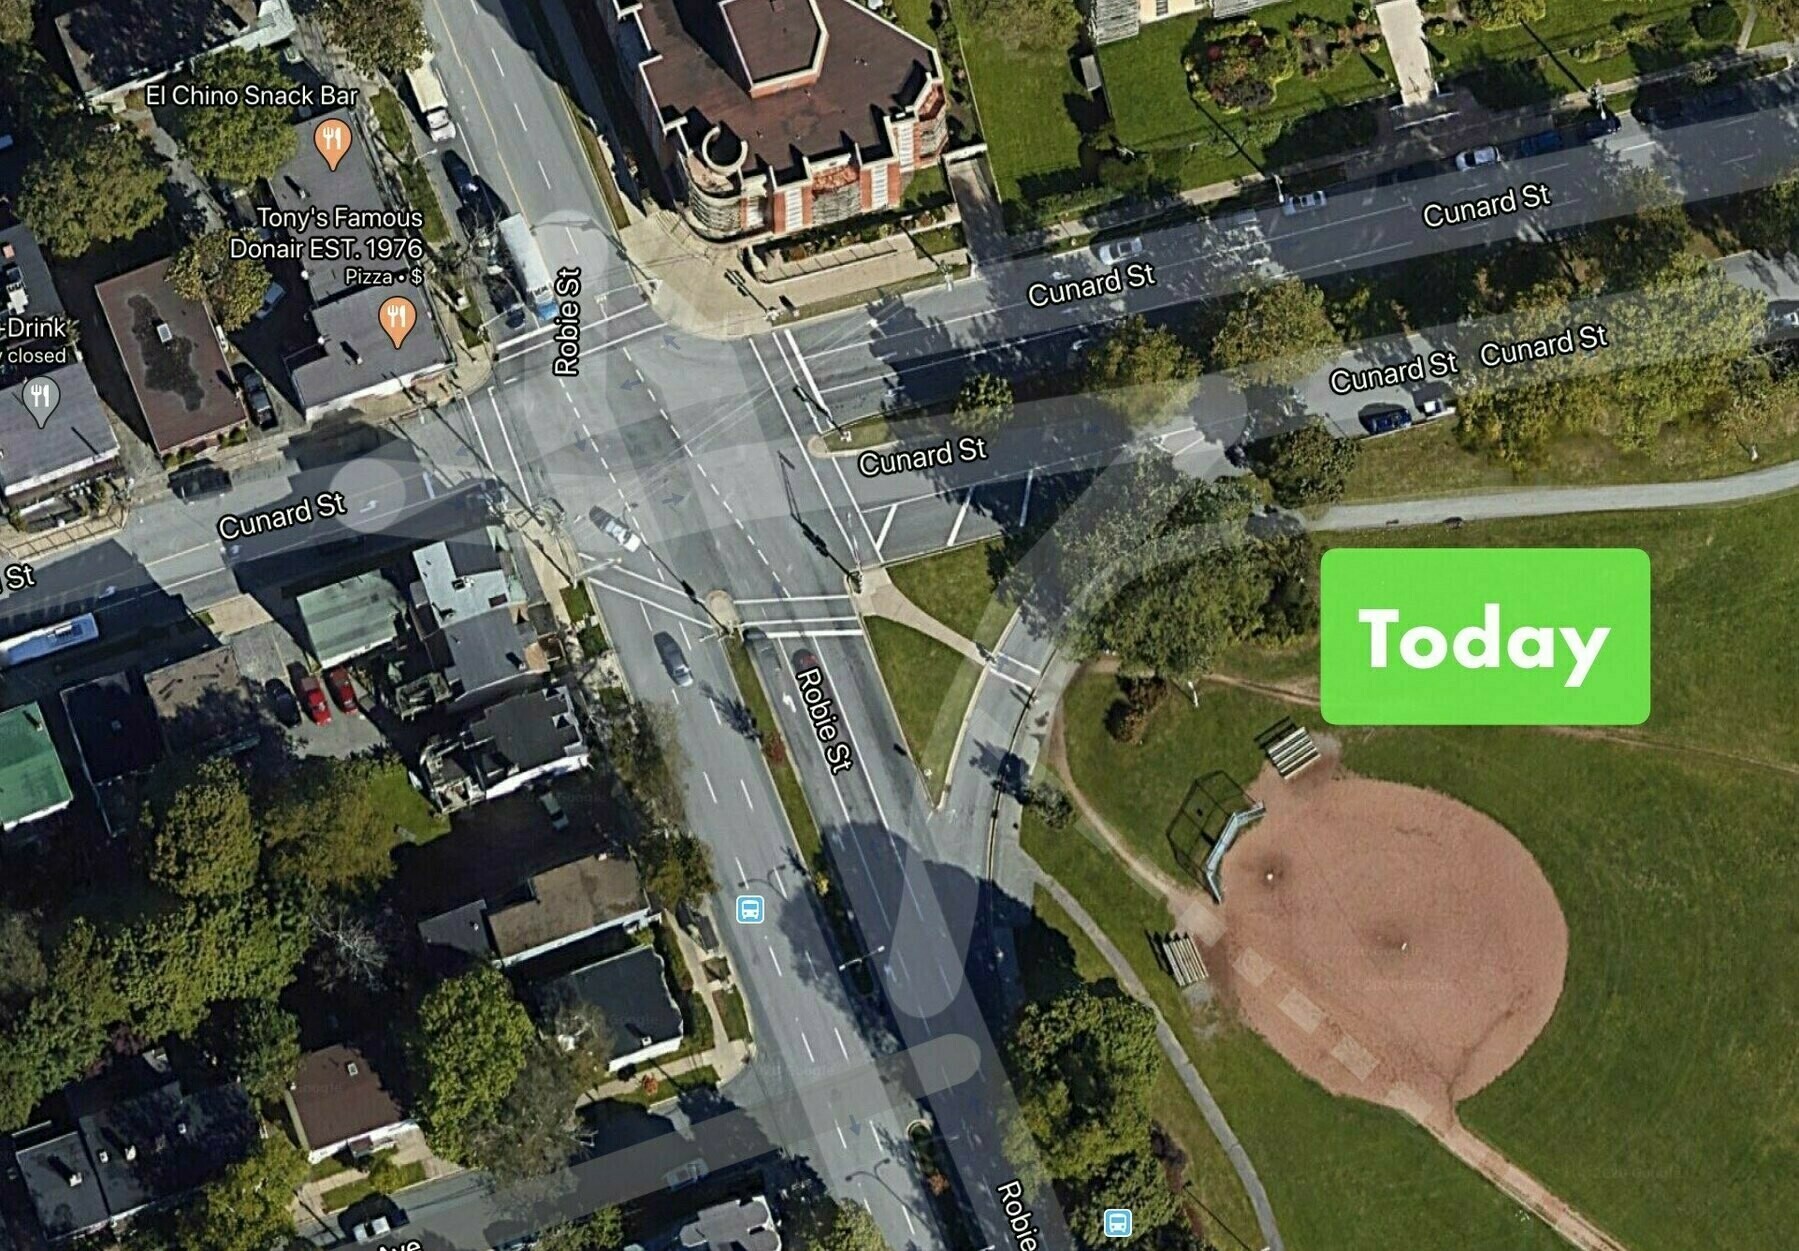 A satellite view of the area showing the oversized intersection